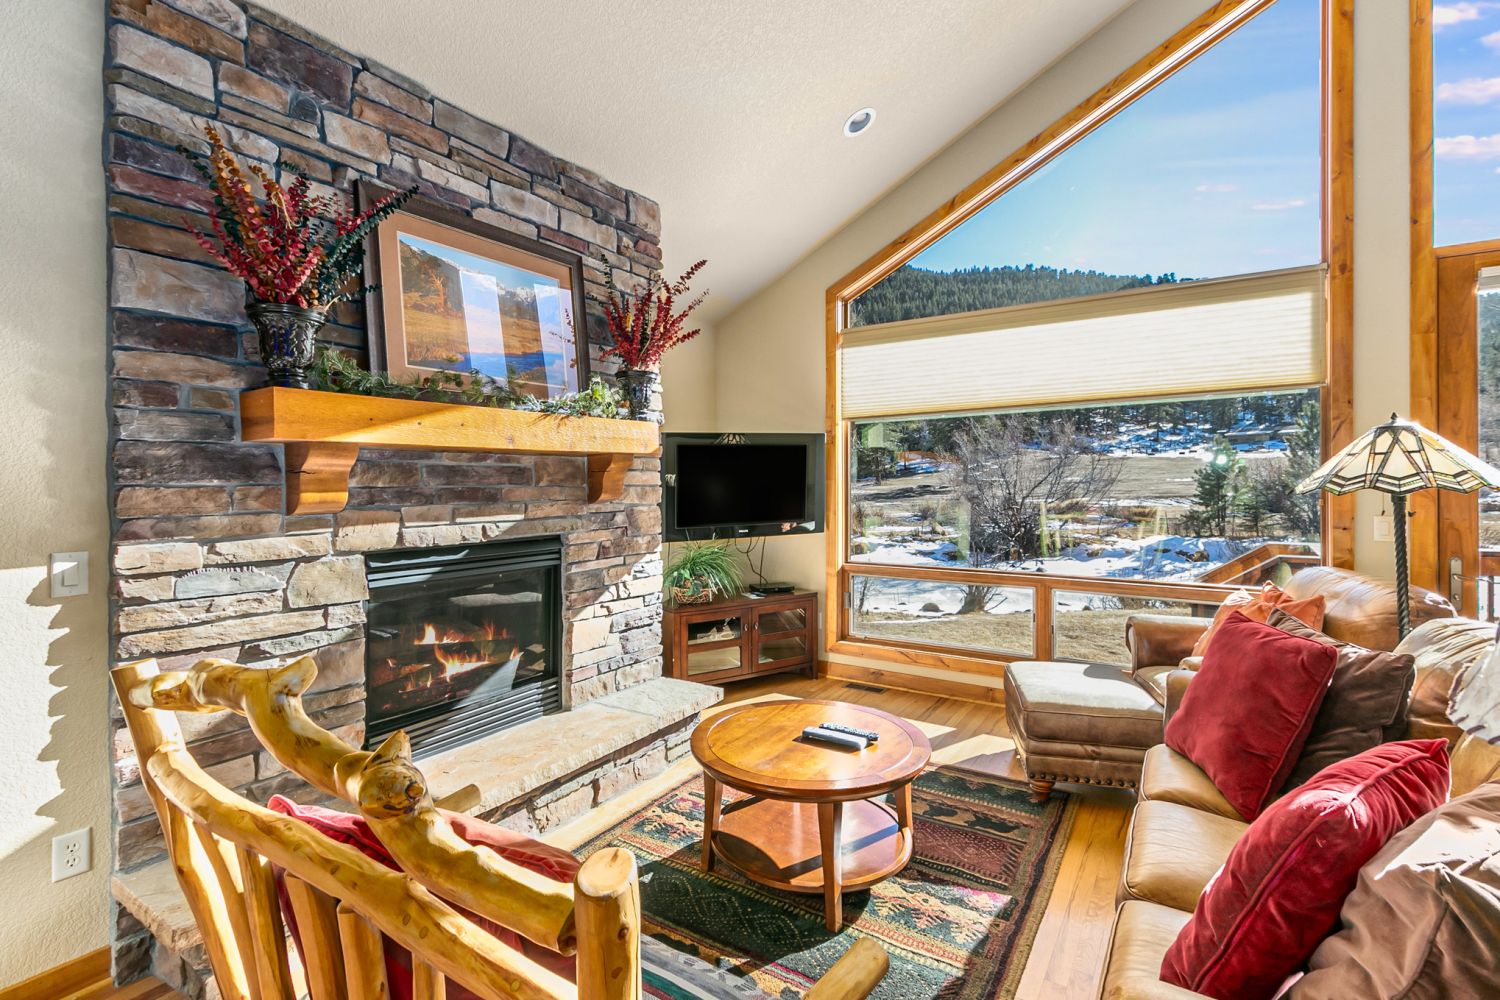 Tranquility on the River Three - Large open living with plenty of comfy seating for all, floor to ceiling windows with a river view, and cozy gas fireplace.